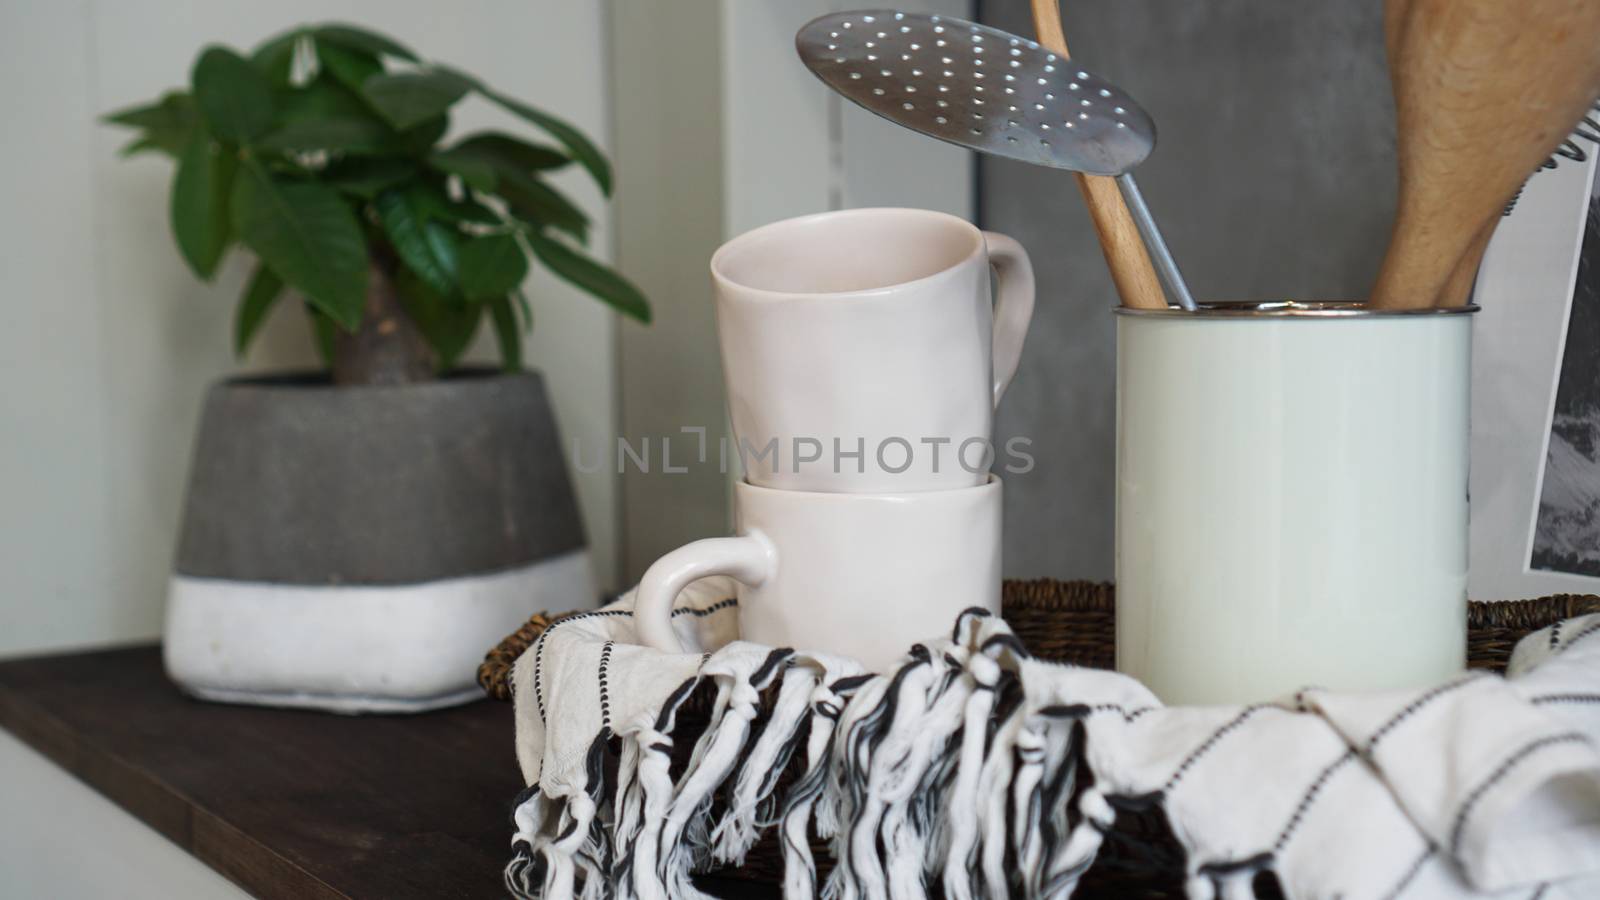 Natural crockery tableware on wooden background. Ceramic dished and cups in neutral tones, scandinavian style.